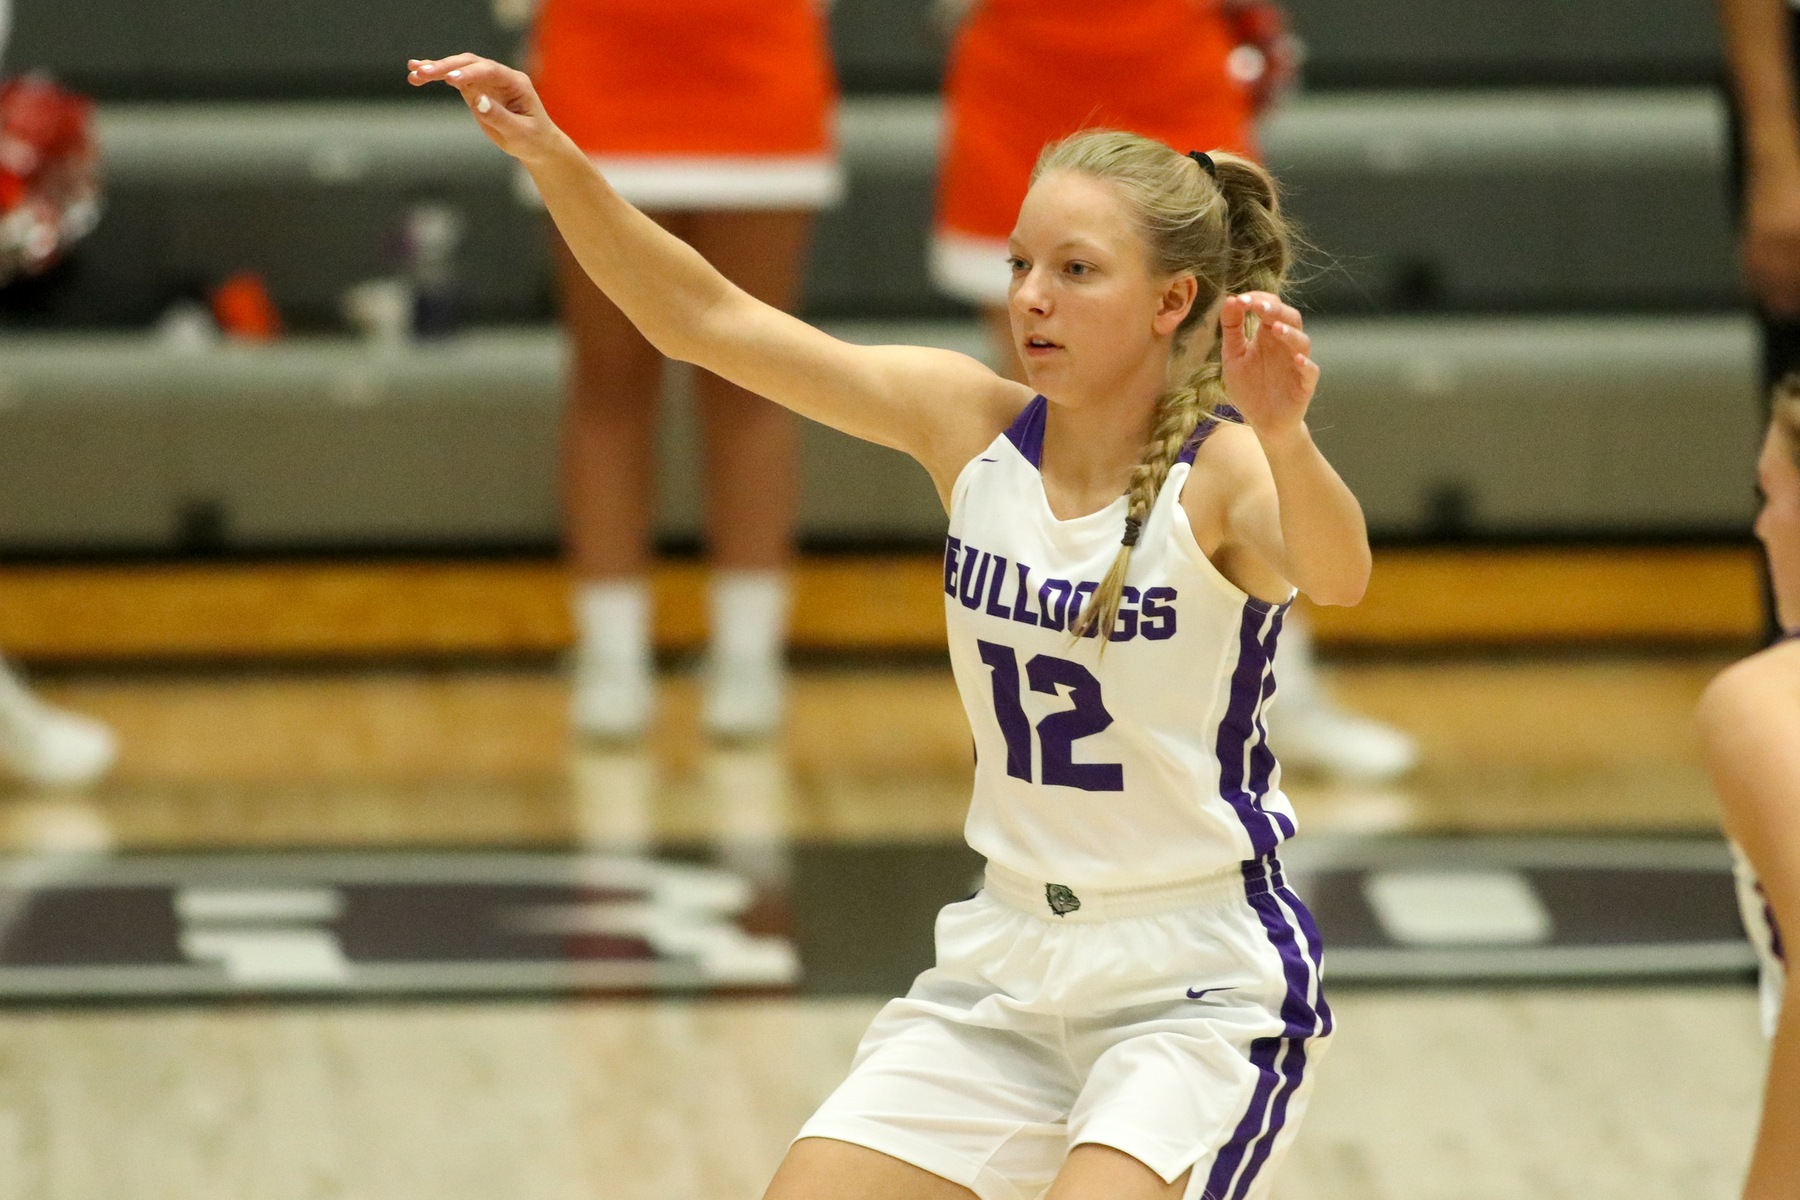 No. 8/8 @bhsdogsghoops beats No. 3/7 North Central in a thriller